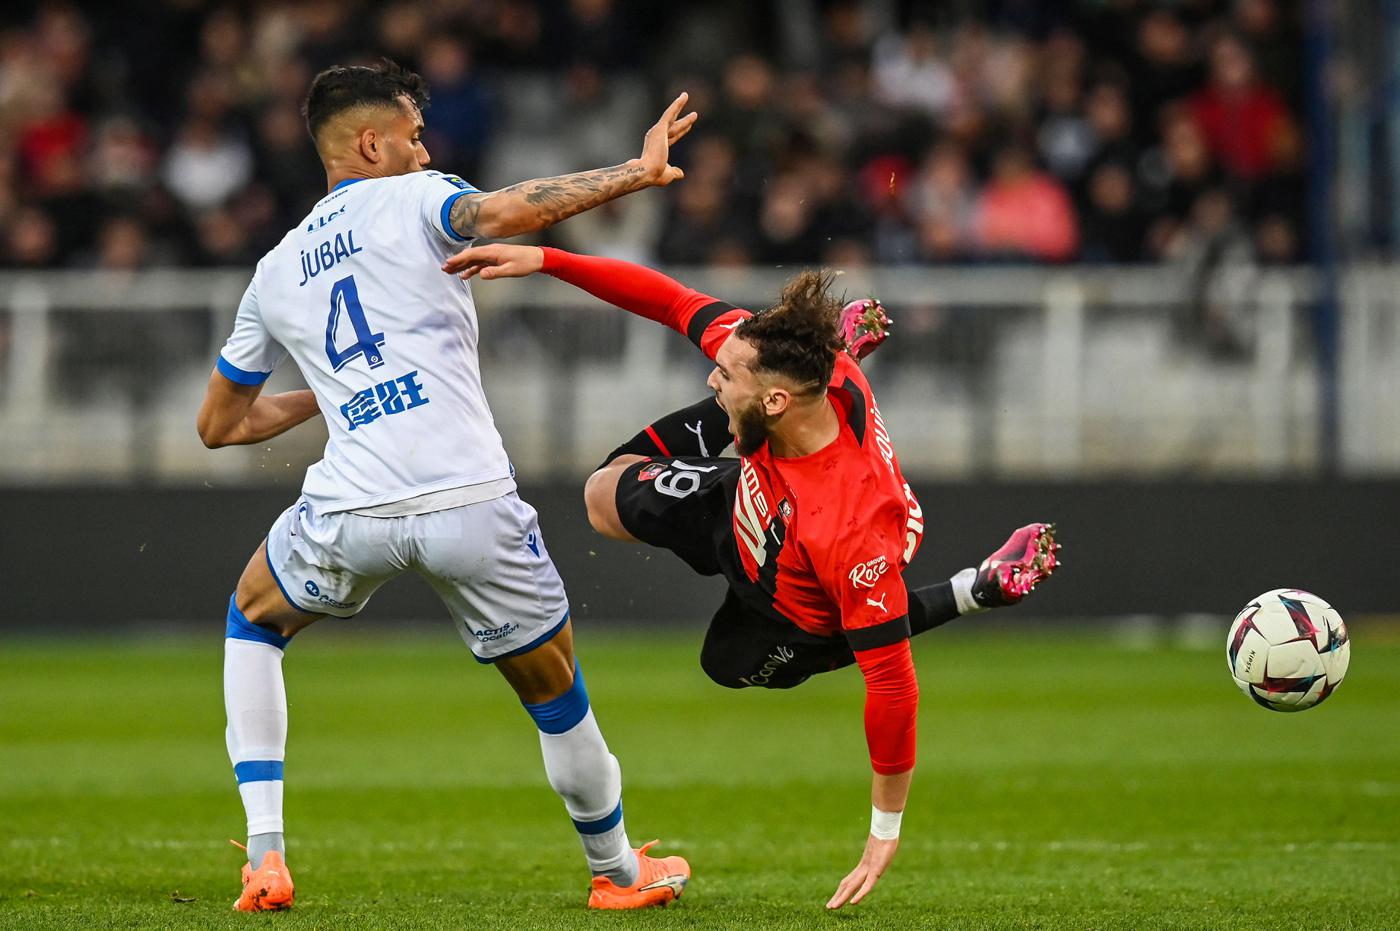 Auxerre - Rennes - 0:0. French Premier League, round 27. Match review, statistics.